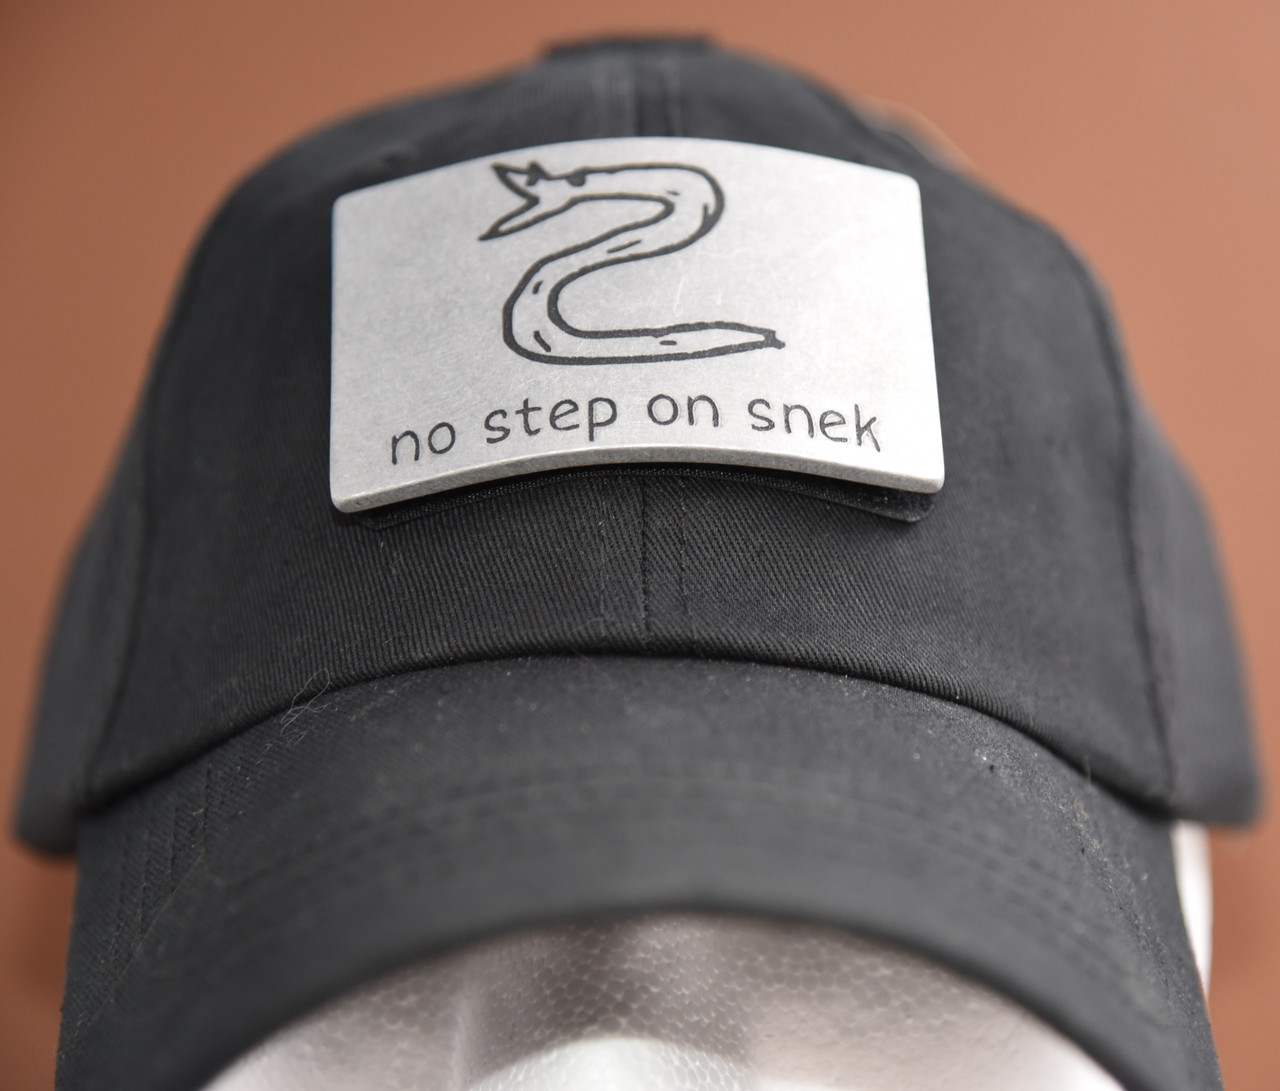 NO STEP ON SNEK – I Heart This